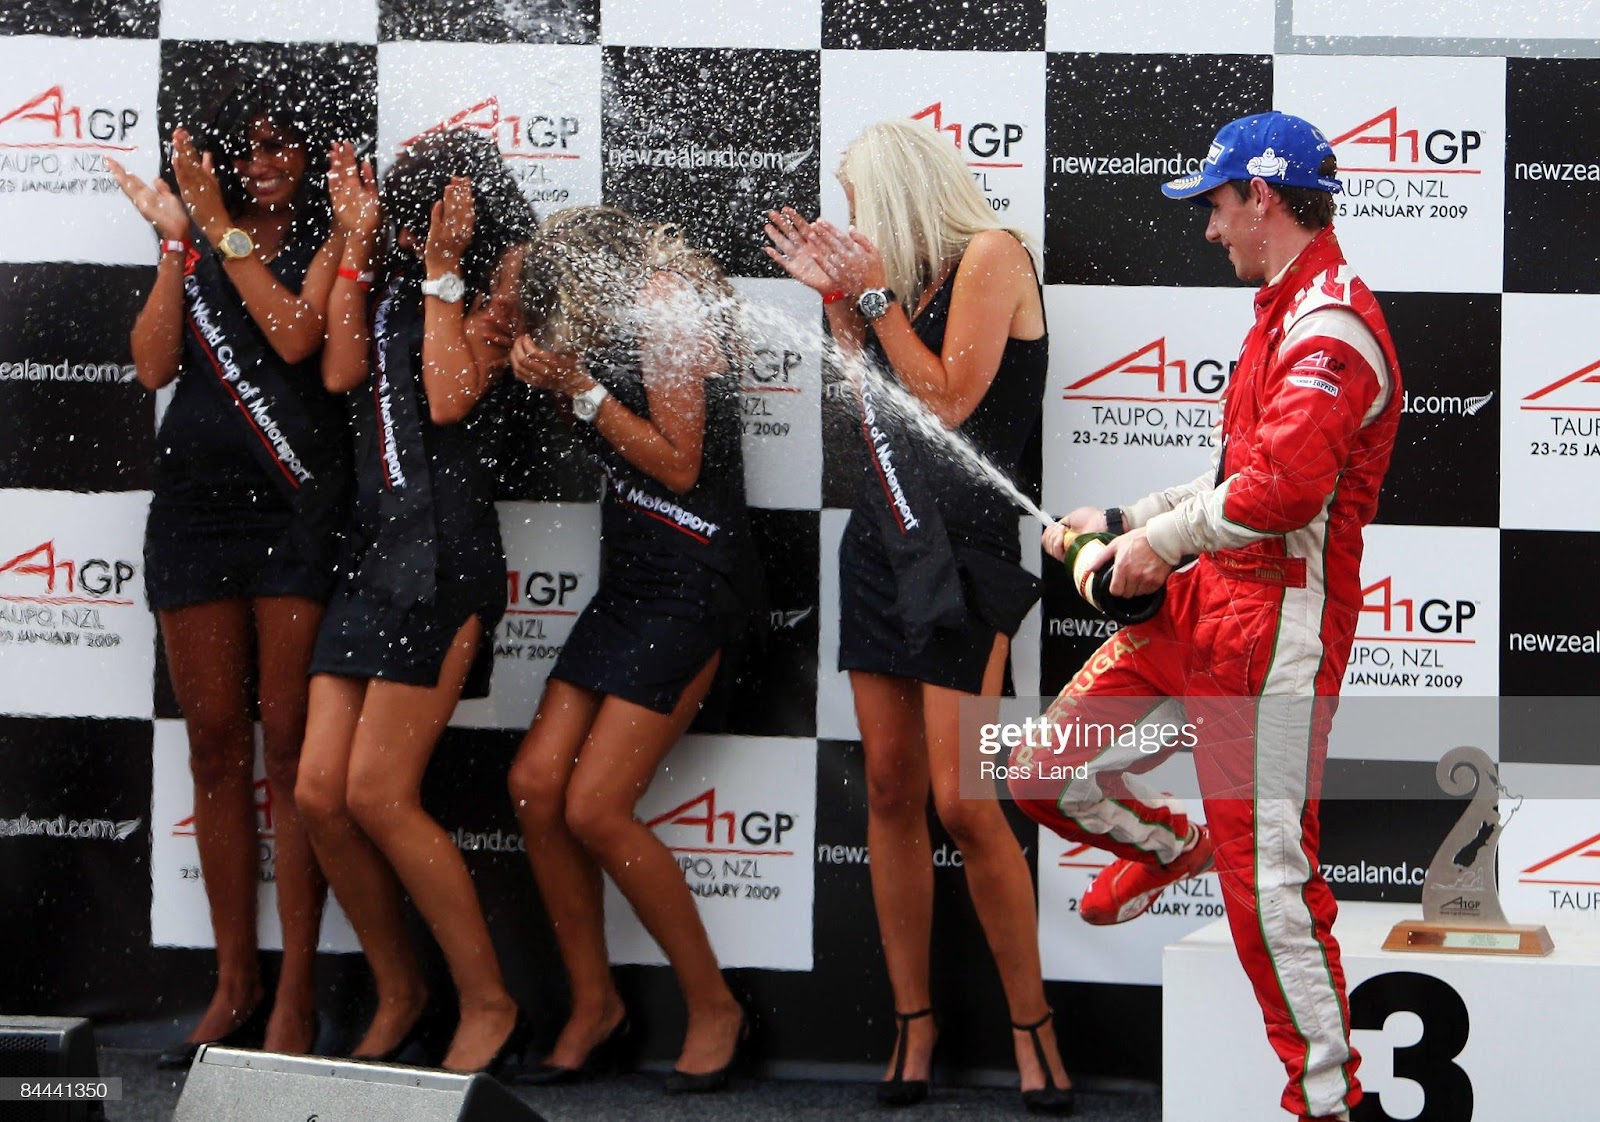 D:\Documenti\posts\posts\Women and motorsport\foto\Getty e altre\filepe-albuquerque-of-portugal-sprays-the-grid-girls-with-champagne-picture-id84441350.jpg